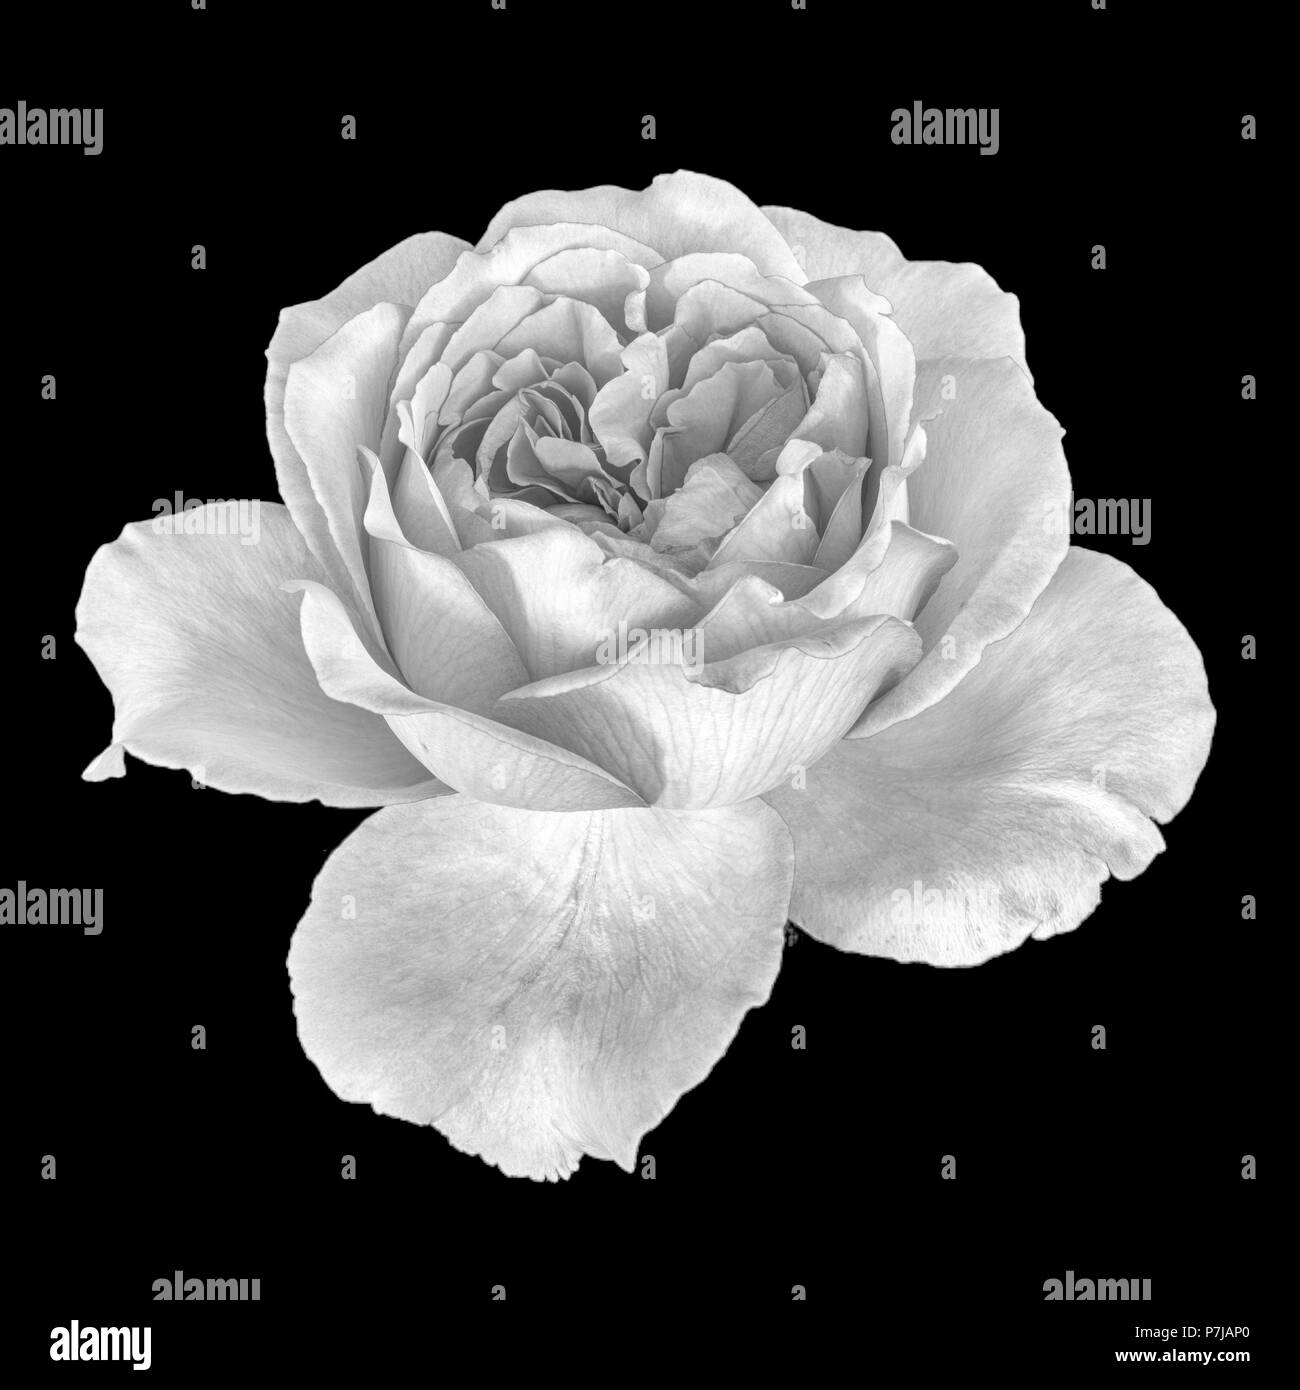 Monochrome fine art still life floral macro flower image of a single isolated white flowering blooming rose blossom, black background,detailed texture Stock Photo